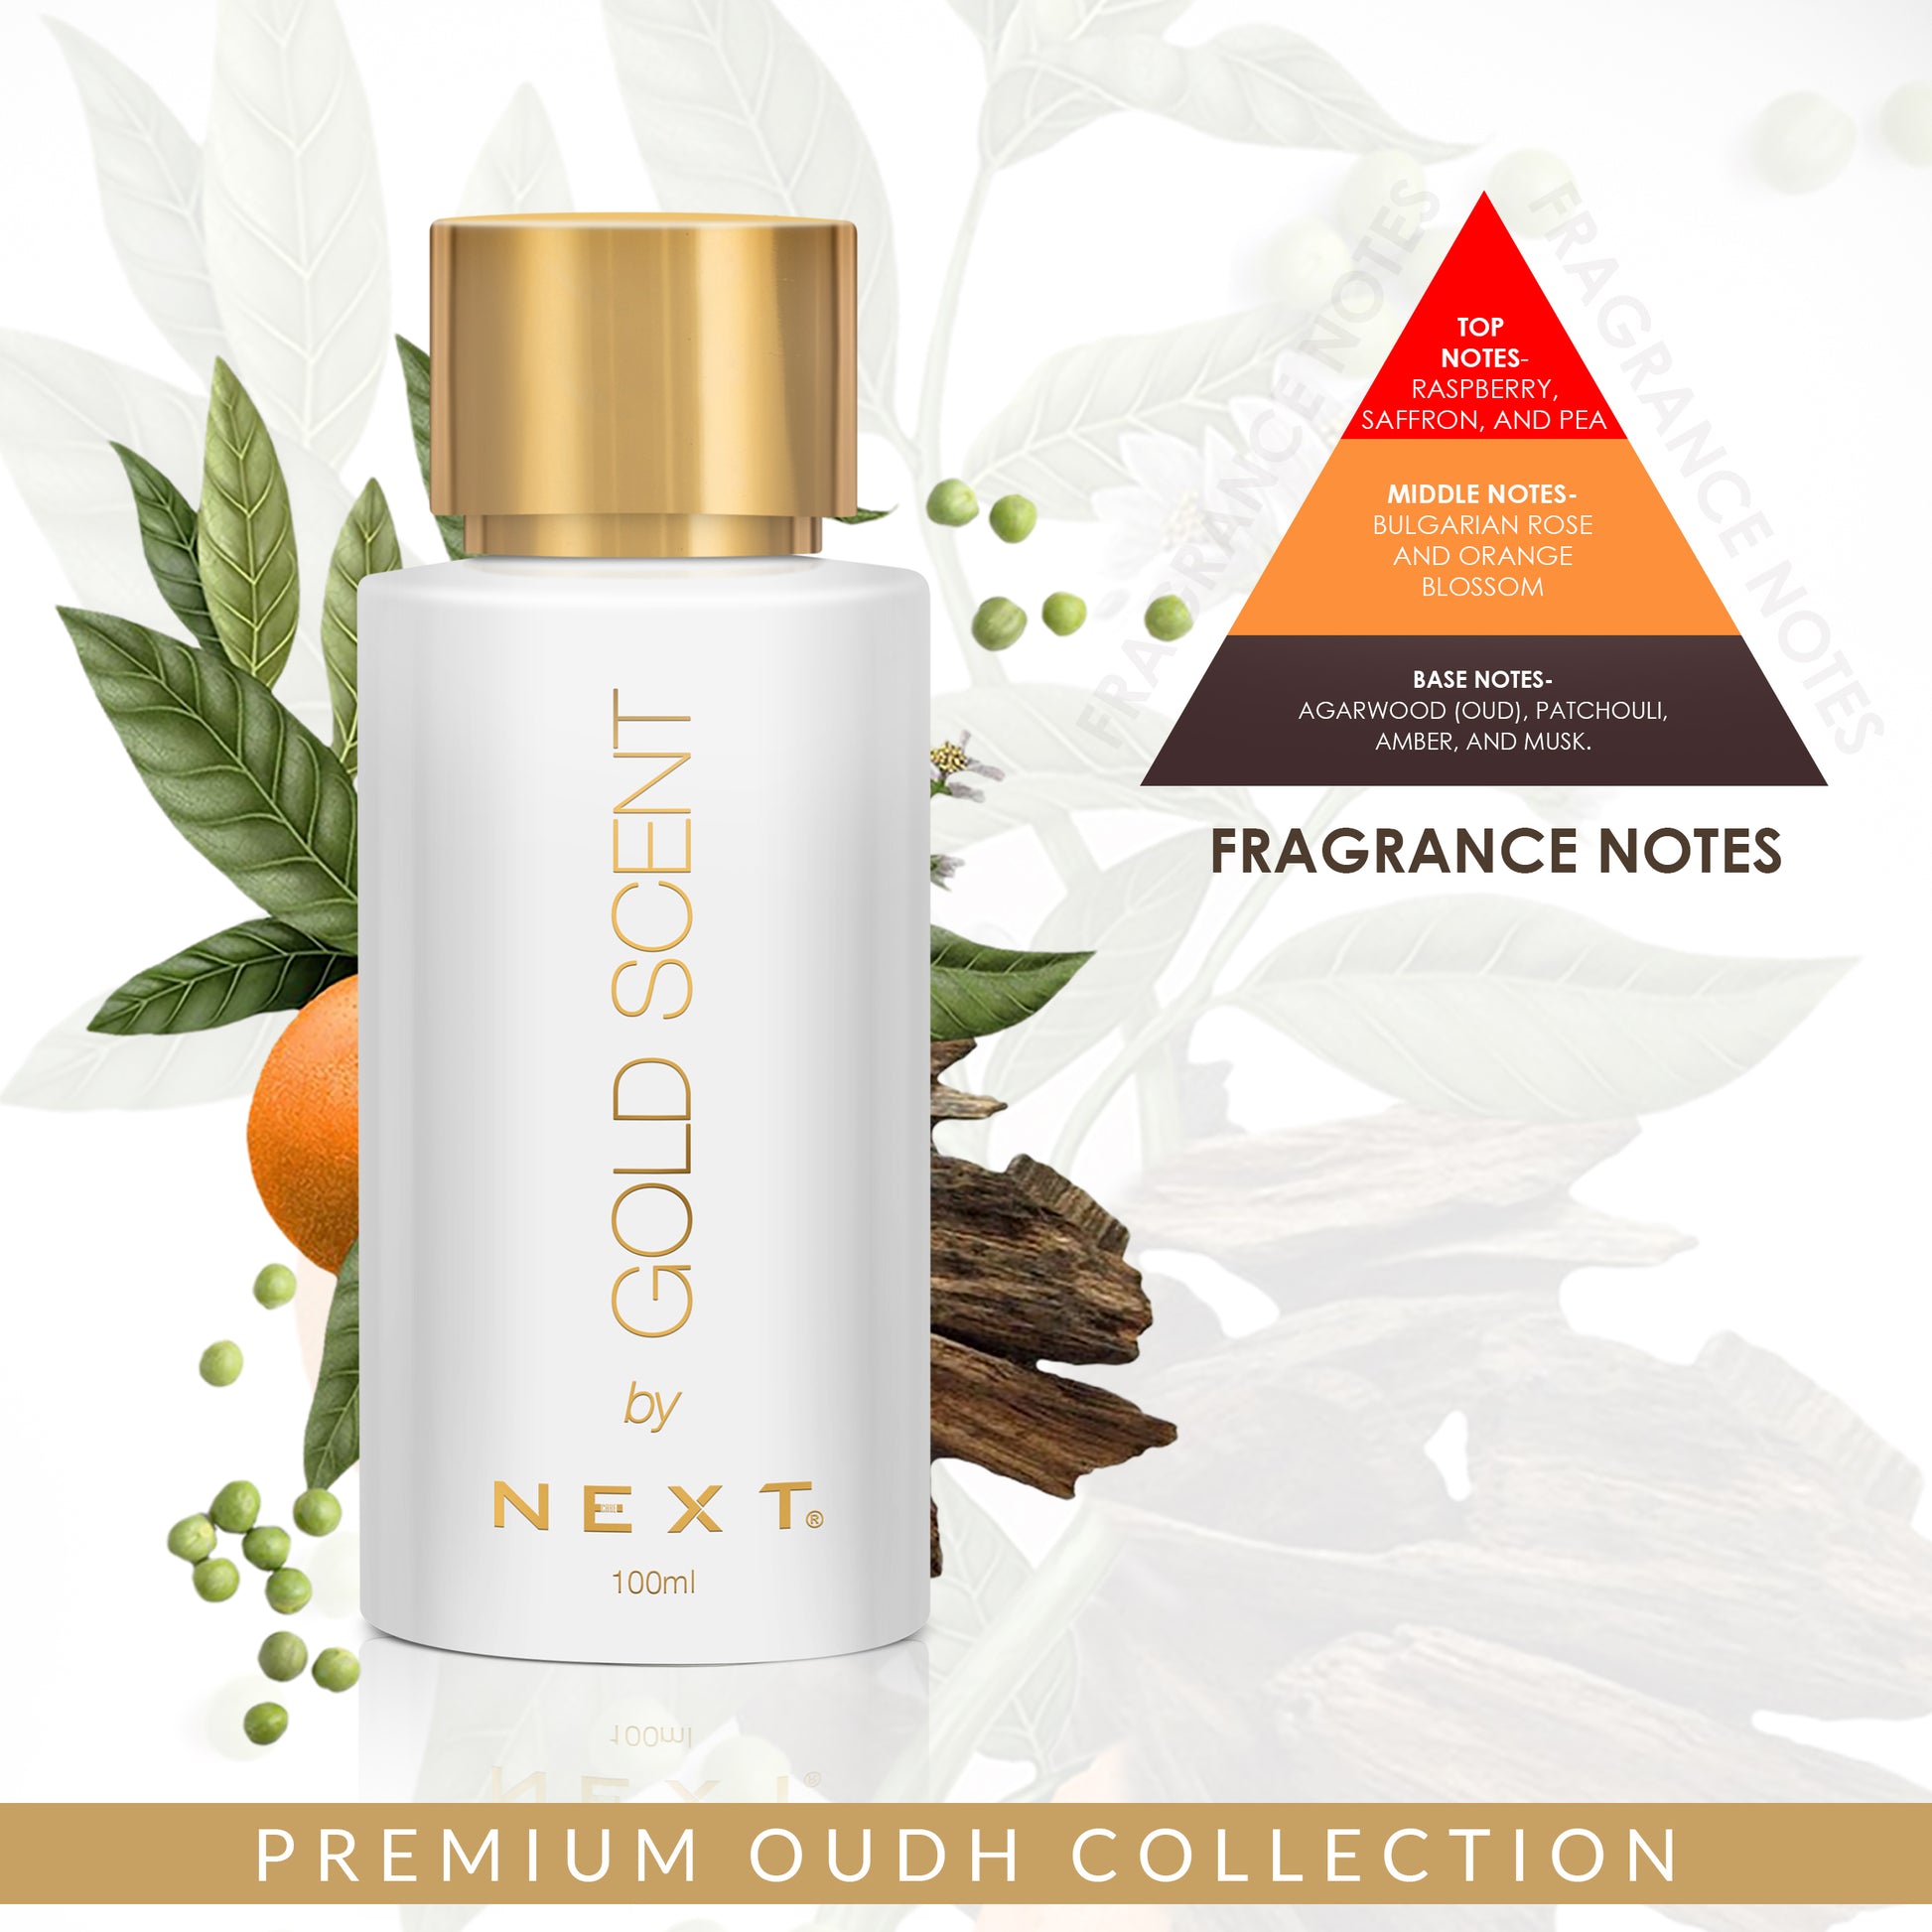 NEXT Gold Scent Oud Perfume - 100ml